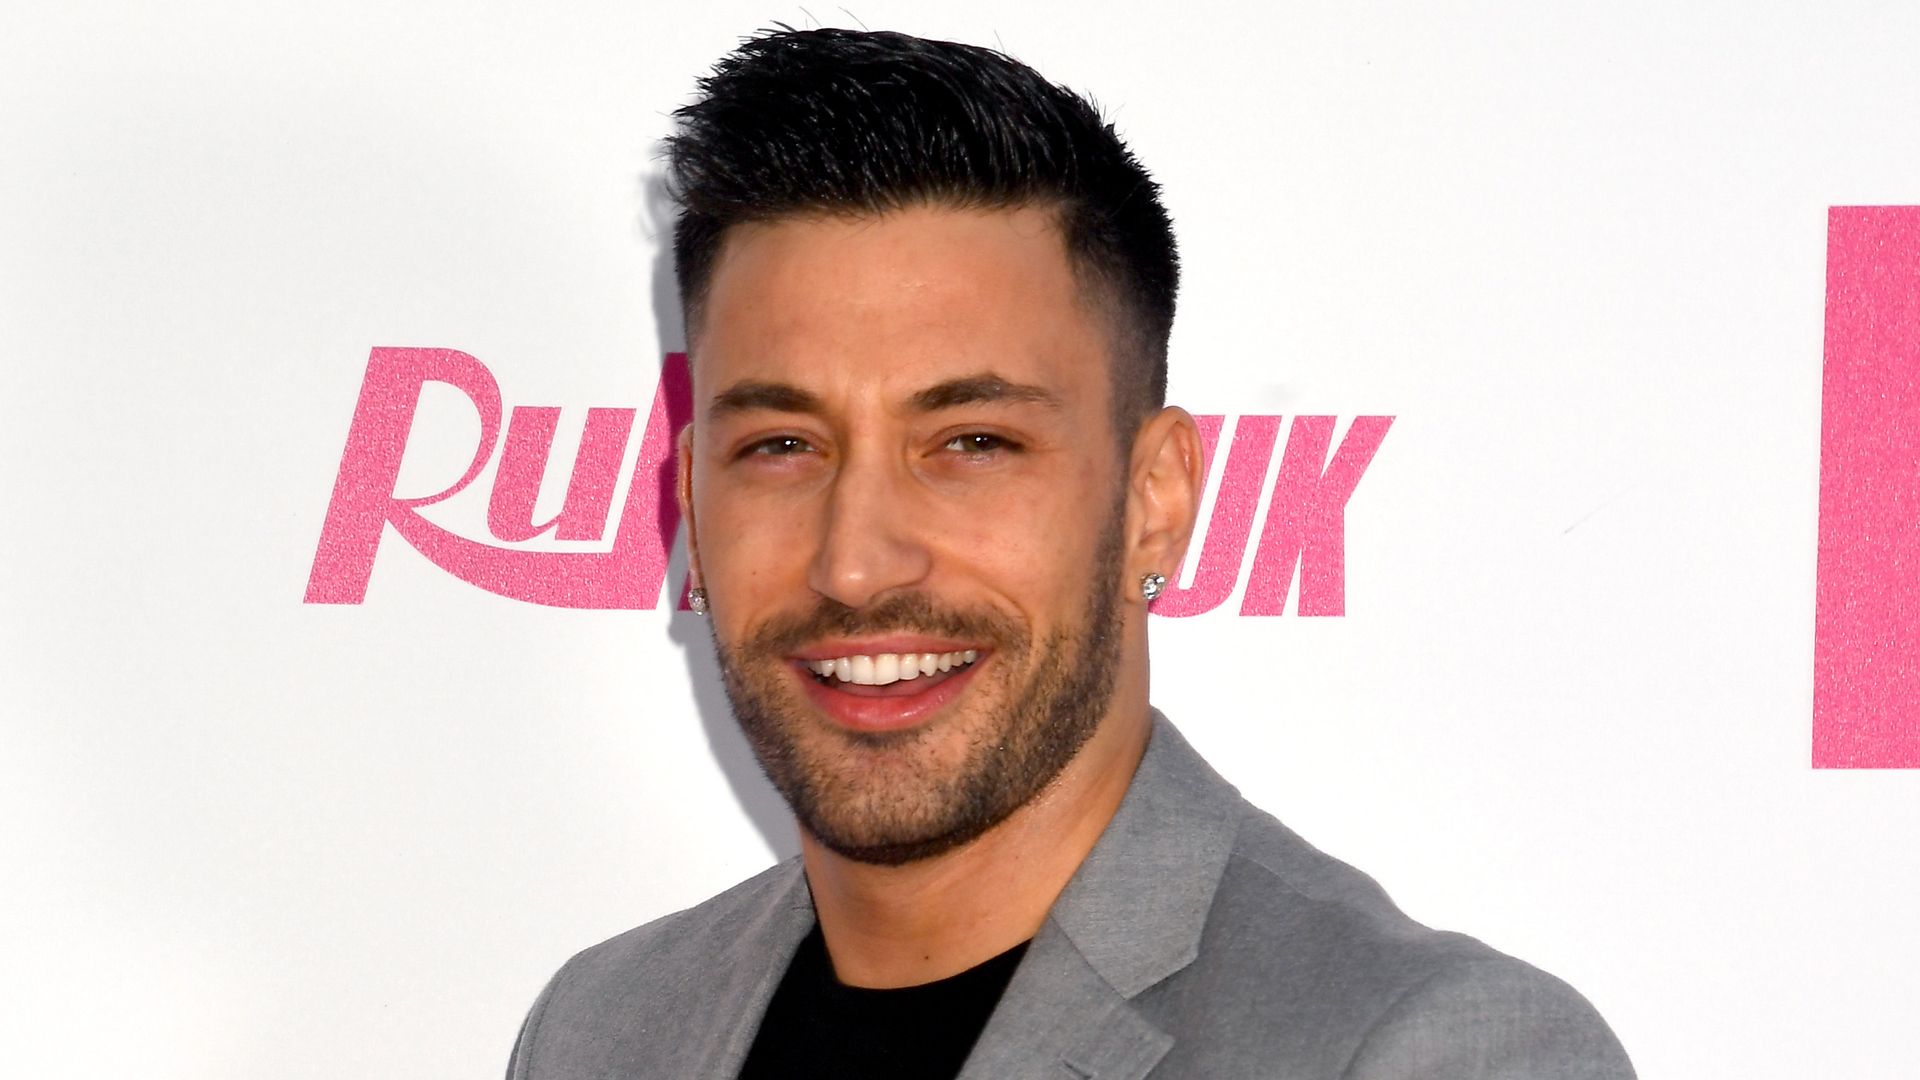 Giovanni Pernice and Molly Brown's reported engagement addressed after ring photo